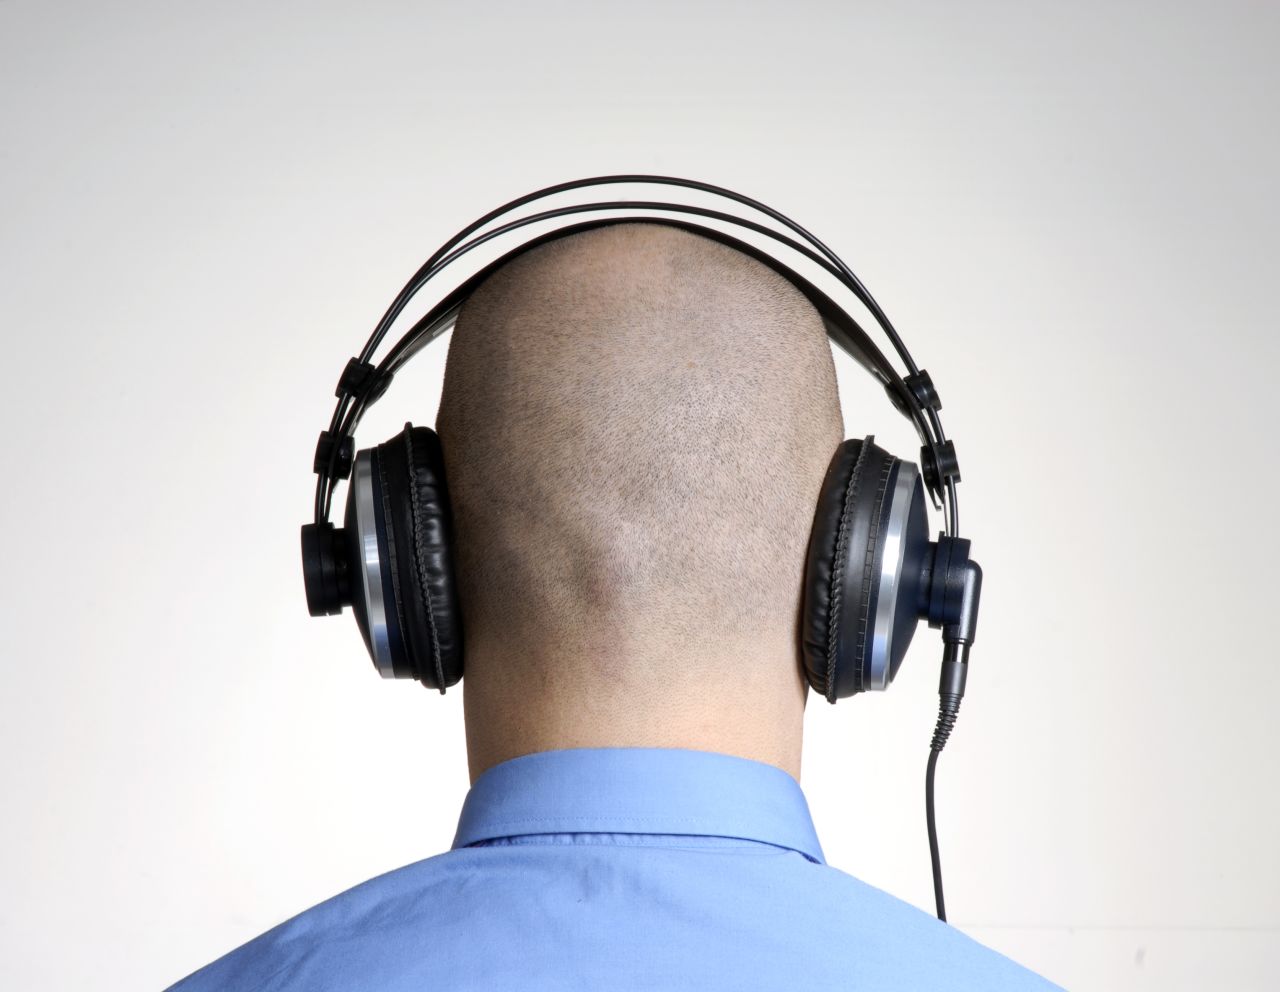 Throw away the headphones -- magnets implanted inside the ear can now play music directly into your head. Rich Lee <a href="http://www.theguardian.com/technology/2013/jul/04/headphones-implanted-ear-grinder-rich-lee" target="_blank" target="_blank">received a pair of "internal headphones" last year</a>. 